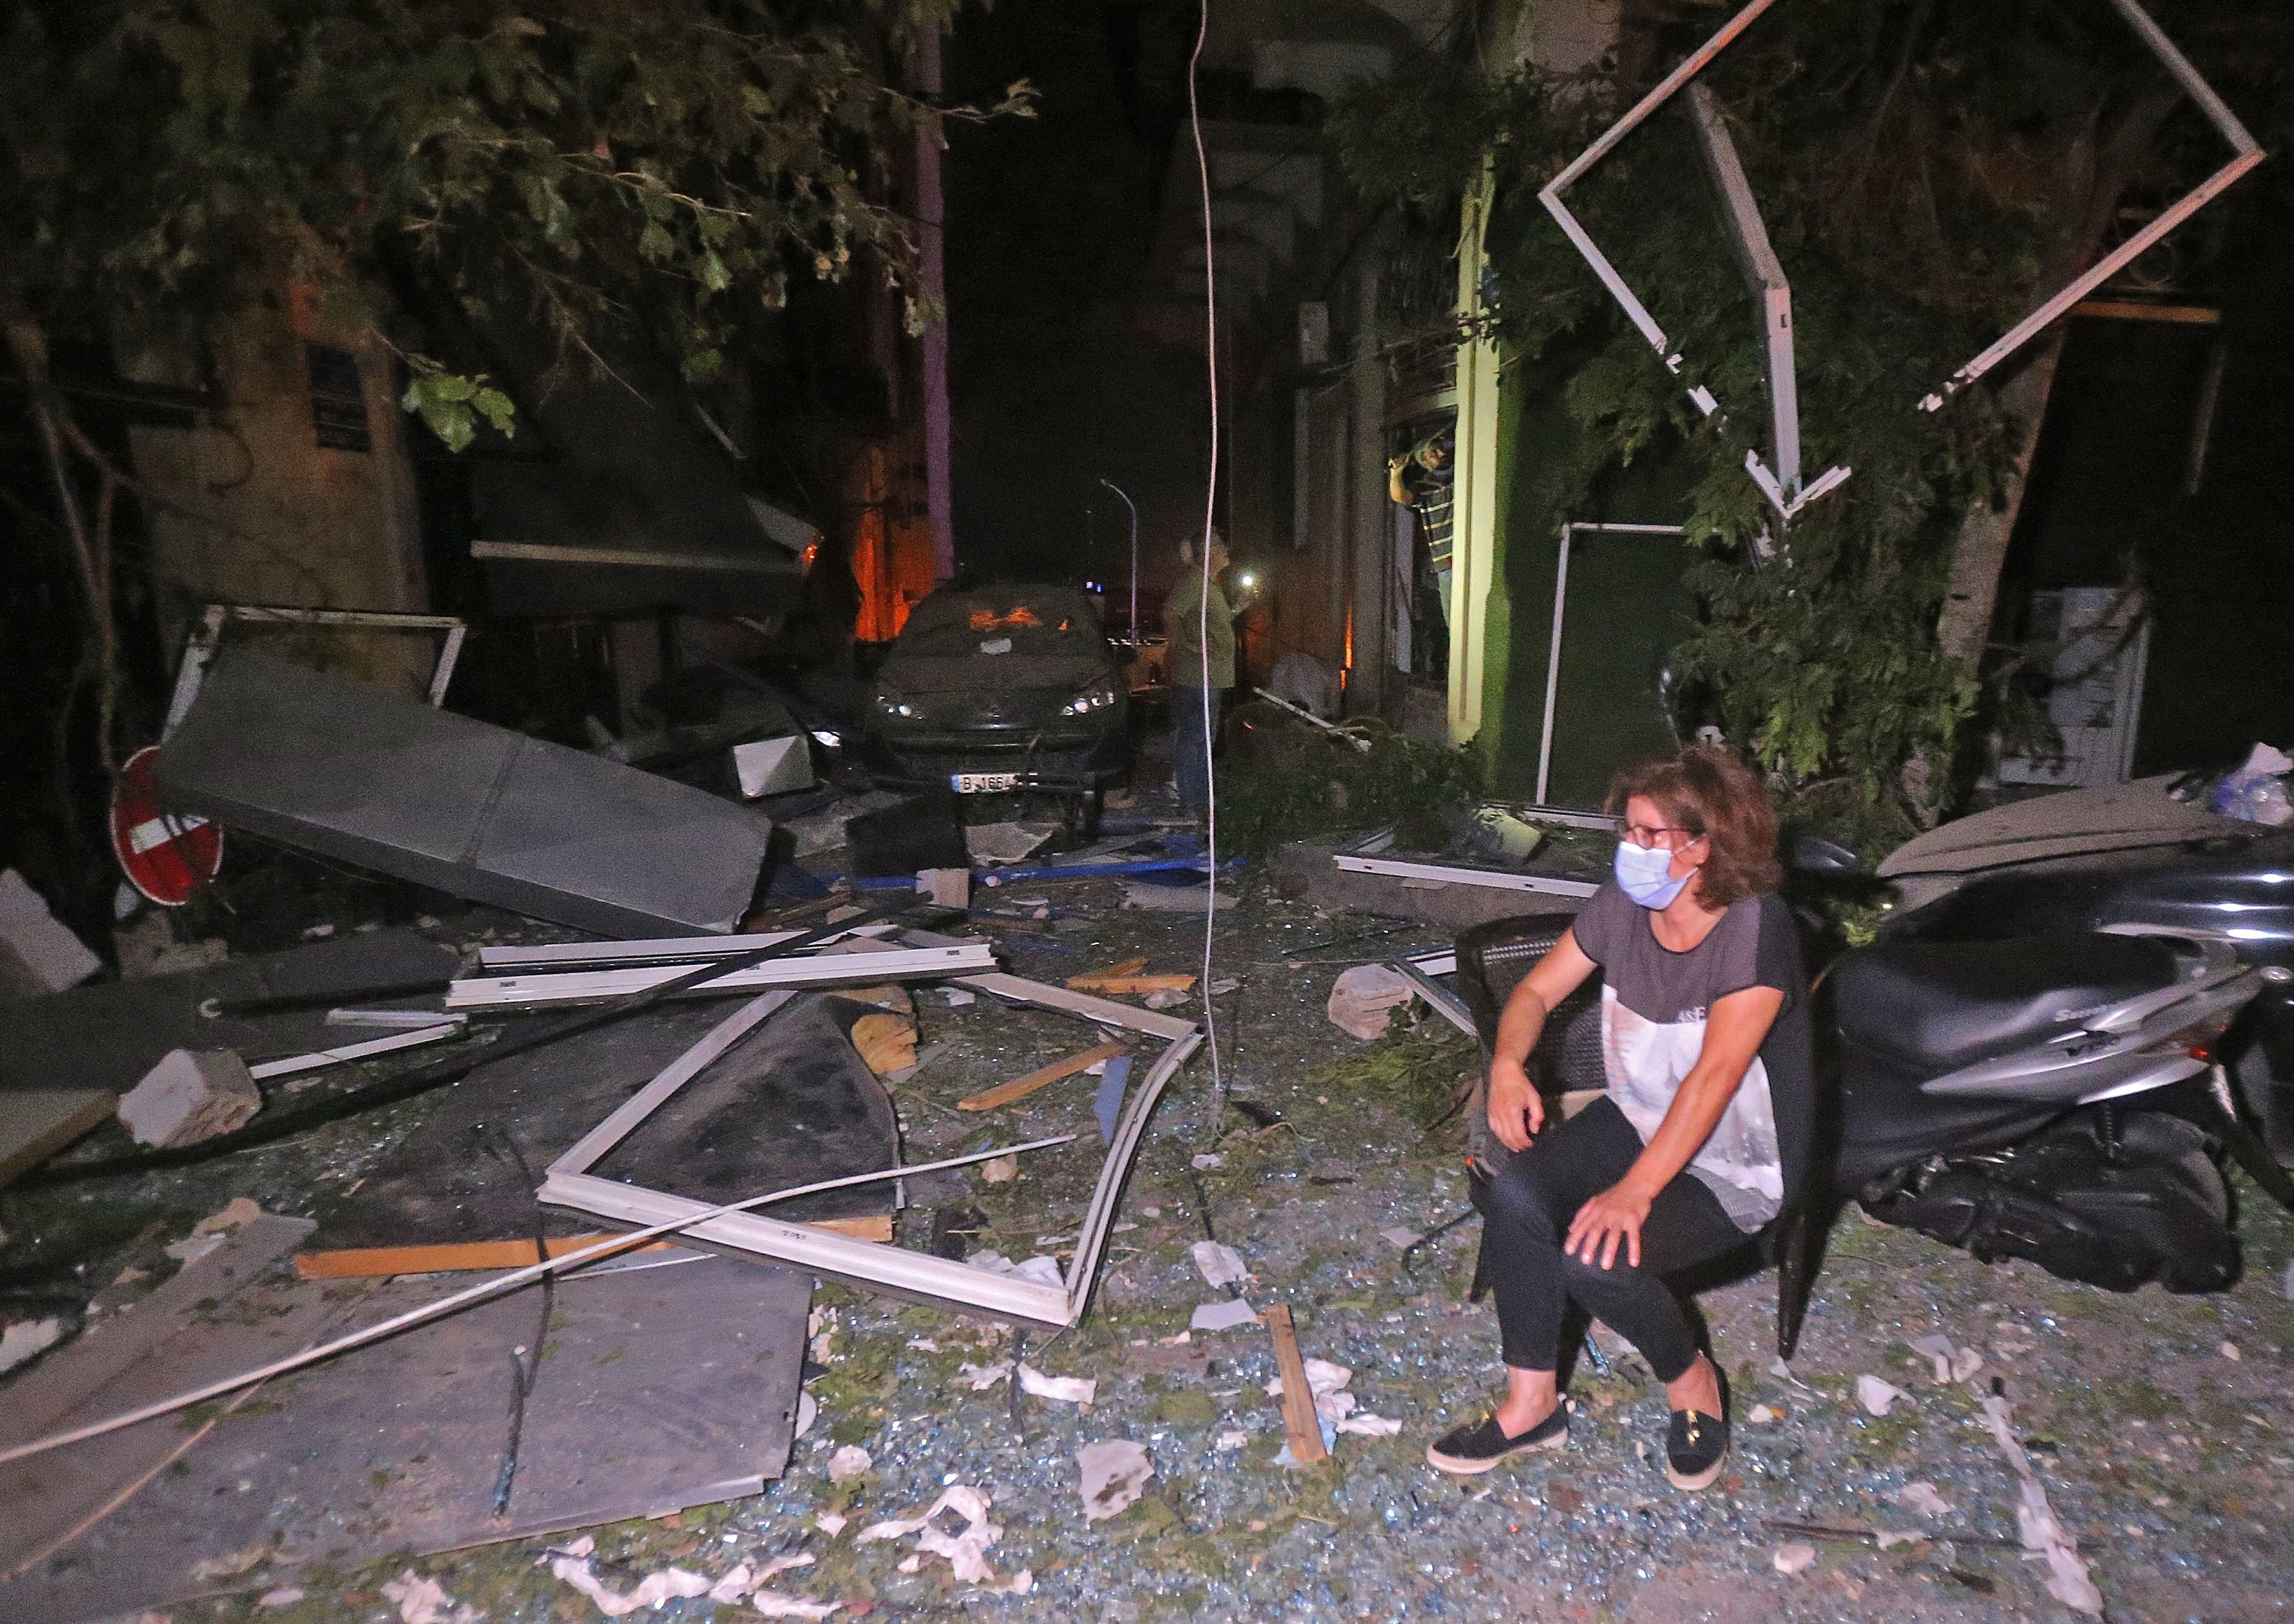 A woman sits on a chair at night on a street covered in glass and debris 